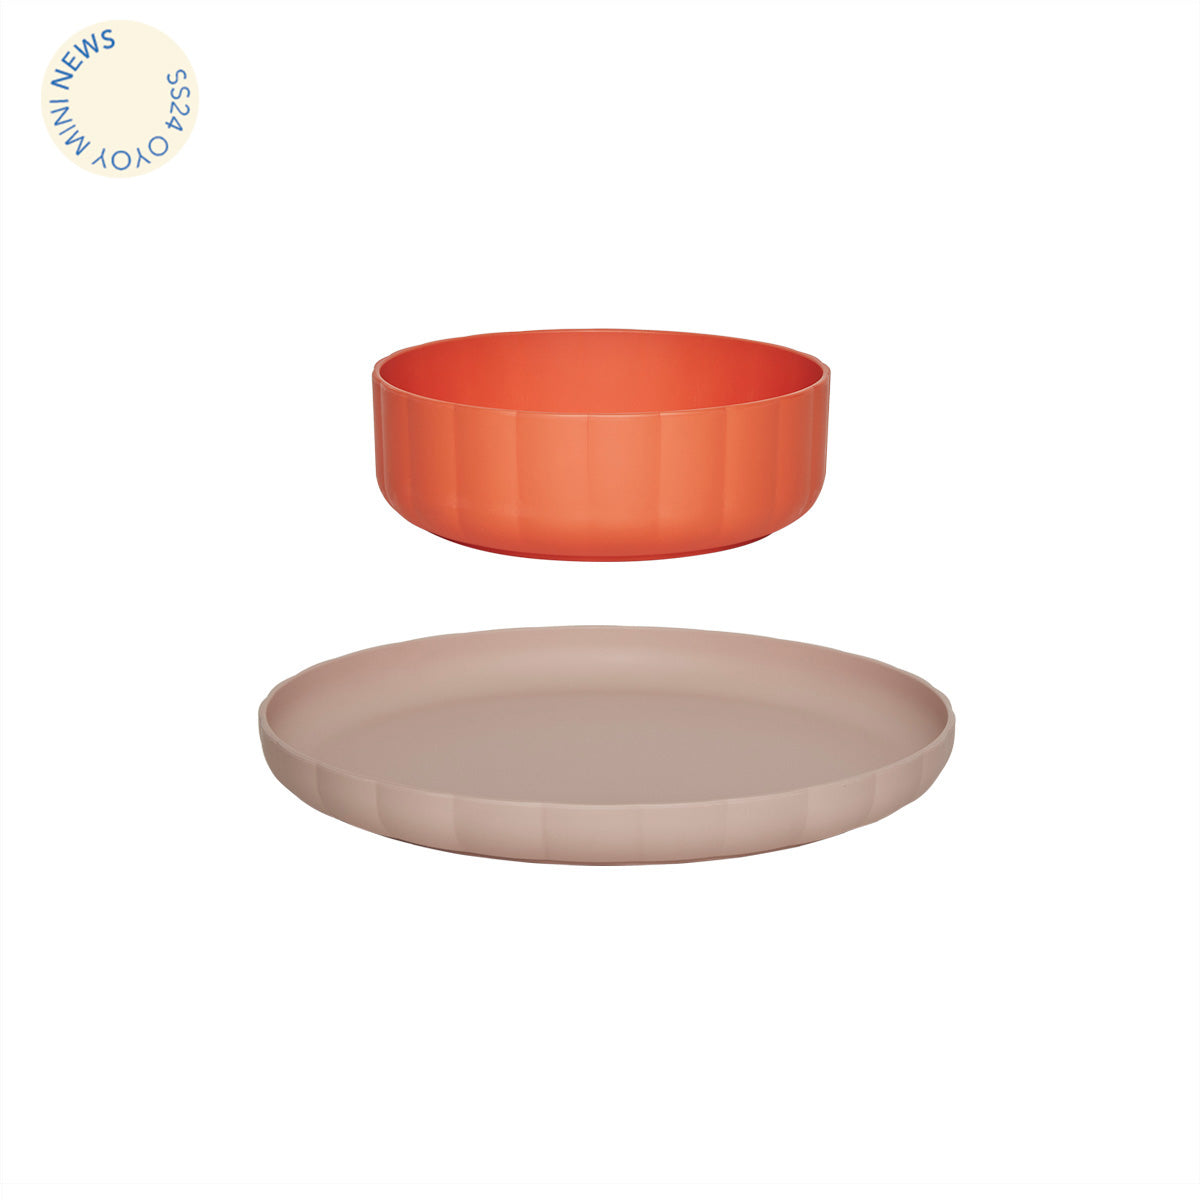 OYOY MINI Pullo Plate & Bowl - Set of 2 Dining Ware 402 Rose / Apricot